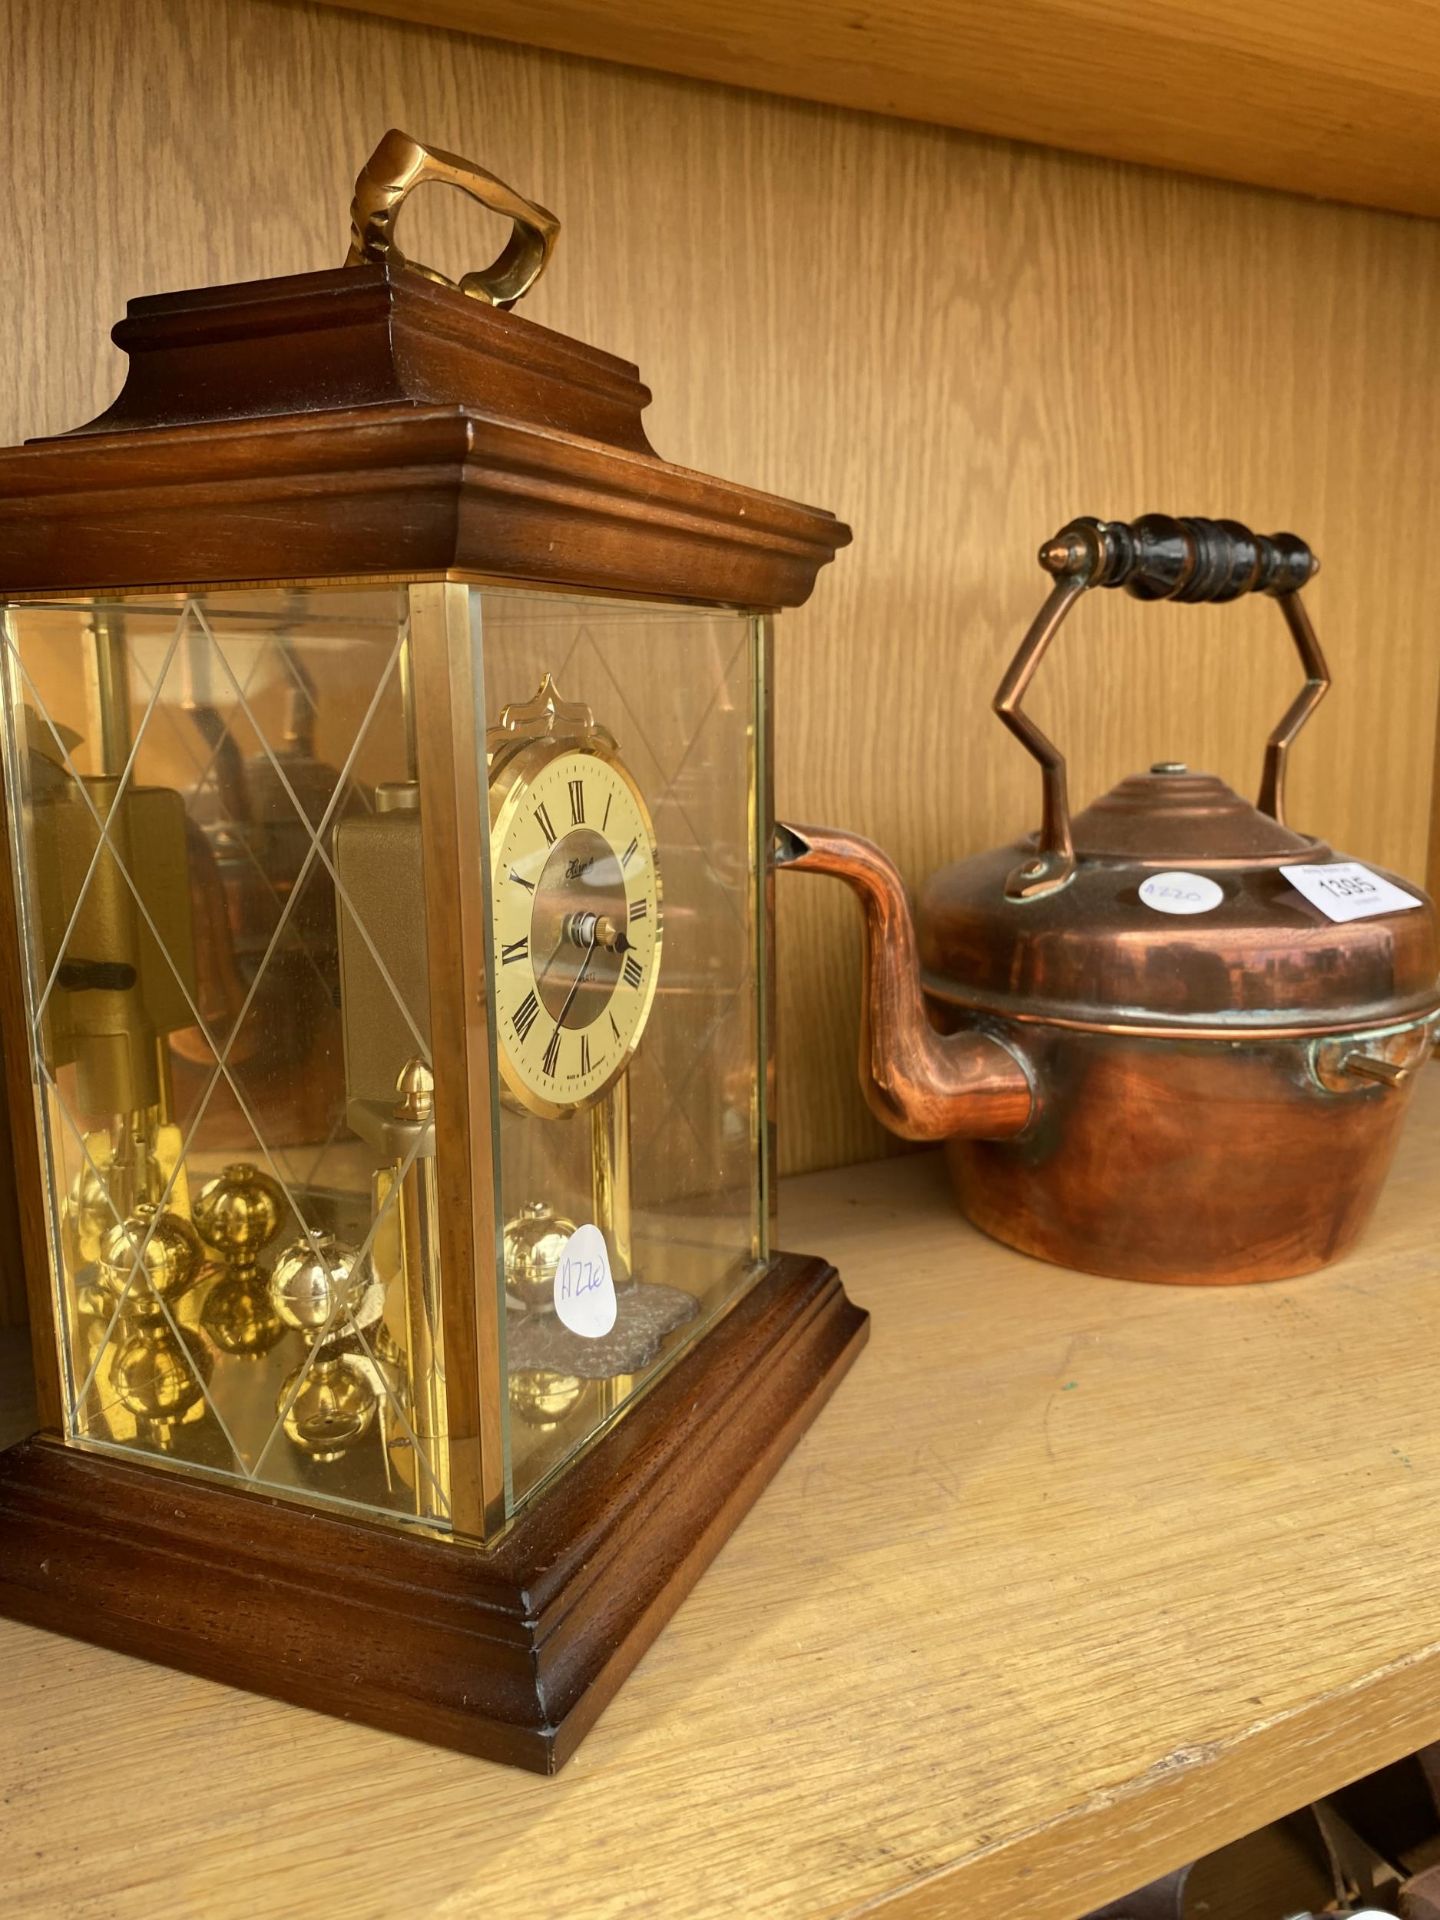 A COPPER KETTLE AND A MANTLE CLOCK - Image 2 of 2